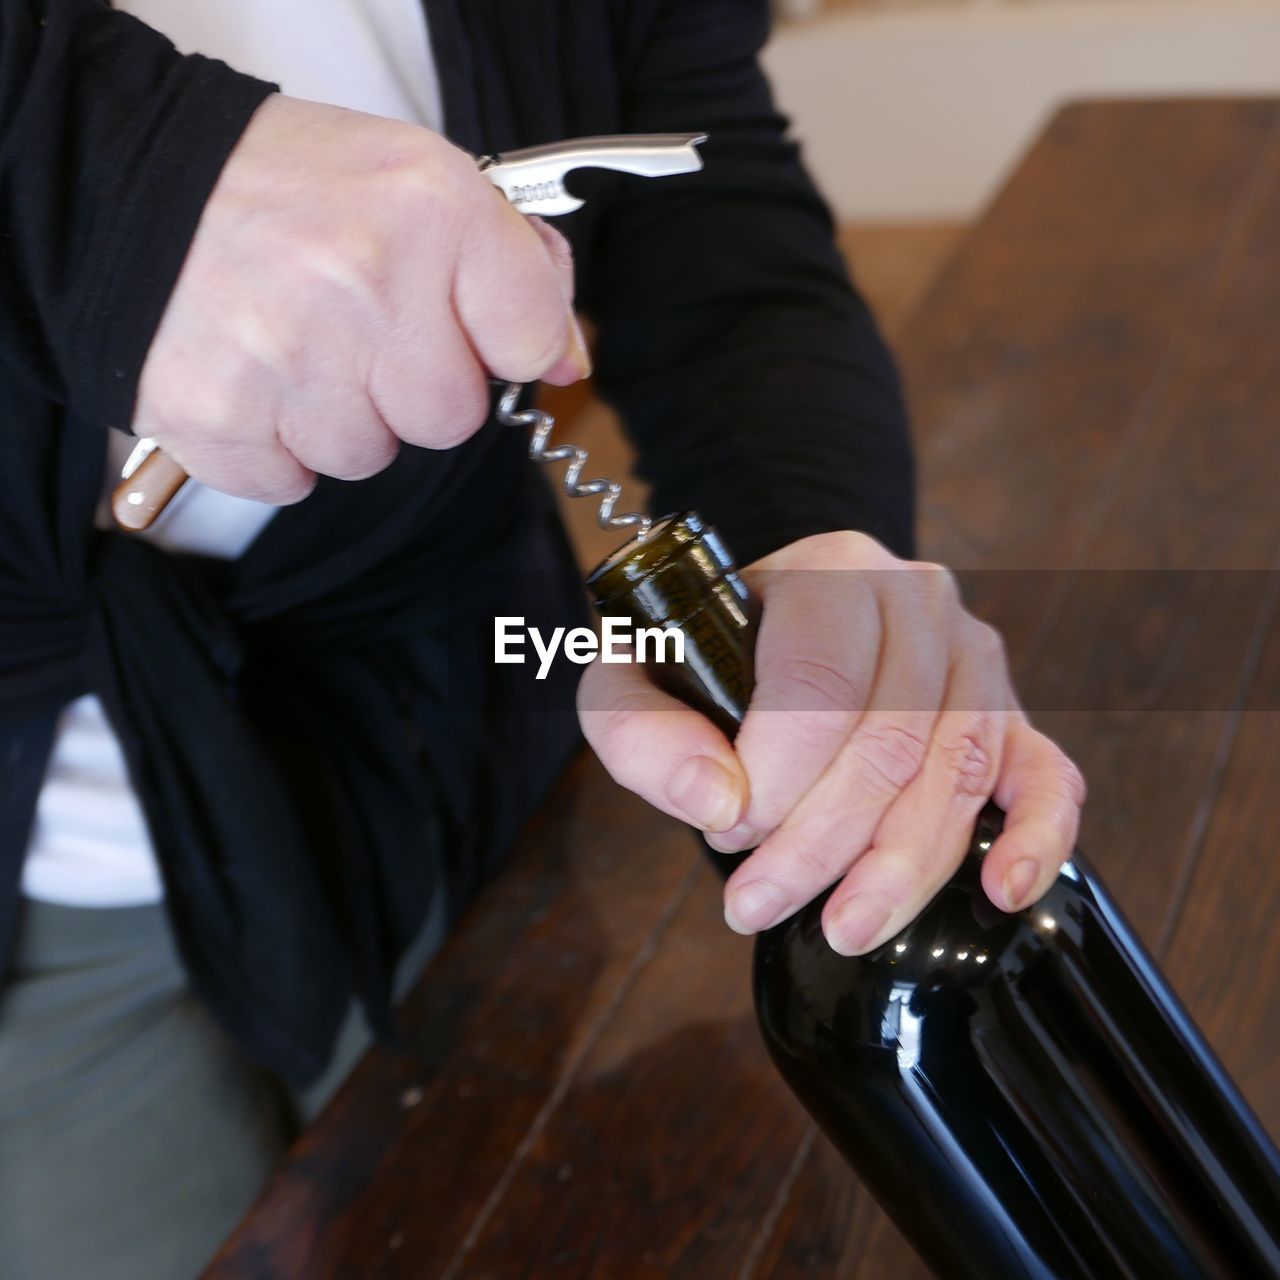 Midsection of man pulling cork from wine bottle